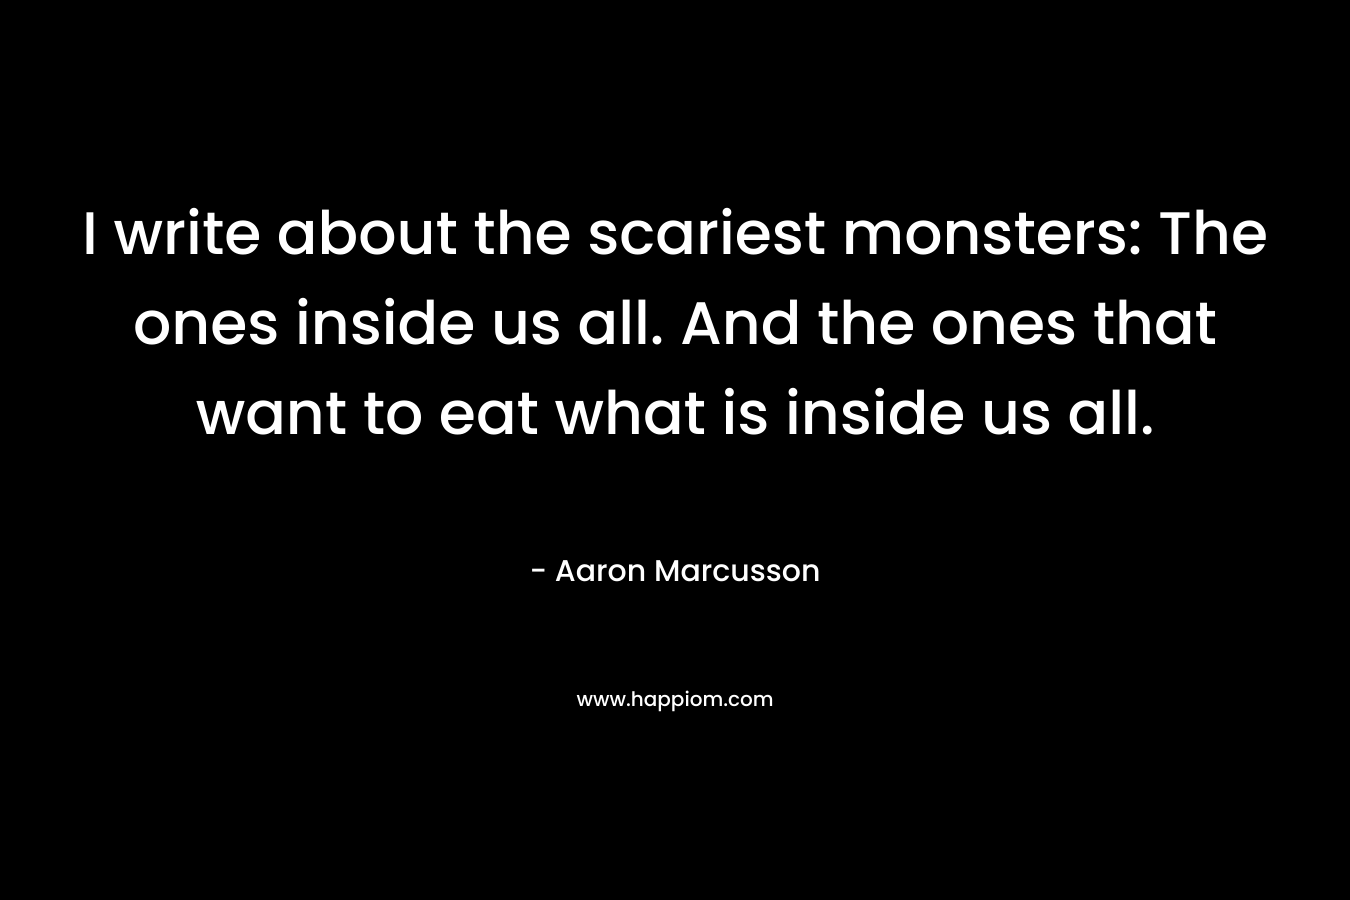 I write about the scariest monsters: The ones inside us all. And the ones that want to eat what is inside us all.